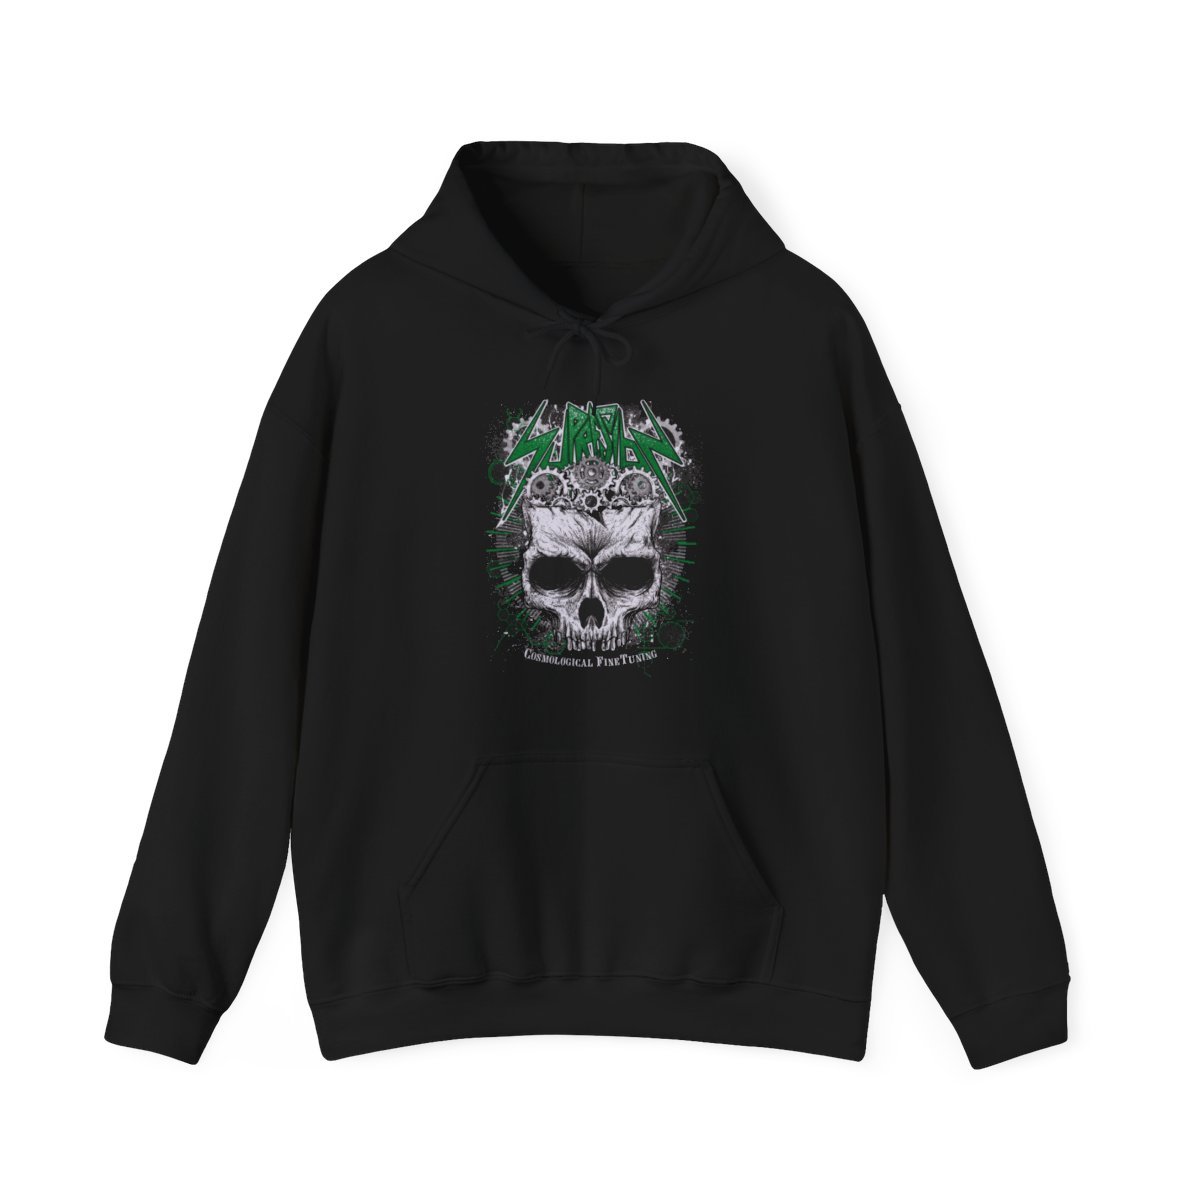 Supresion – Cosmological Fine Tuning (Green) Pullover Hooded Sweatshirt